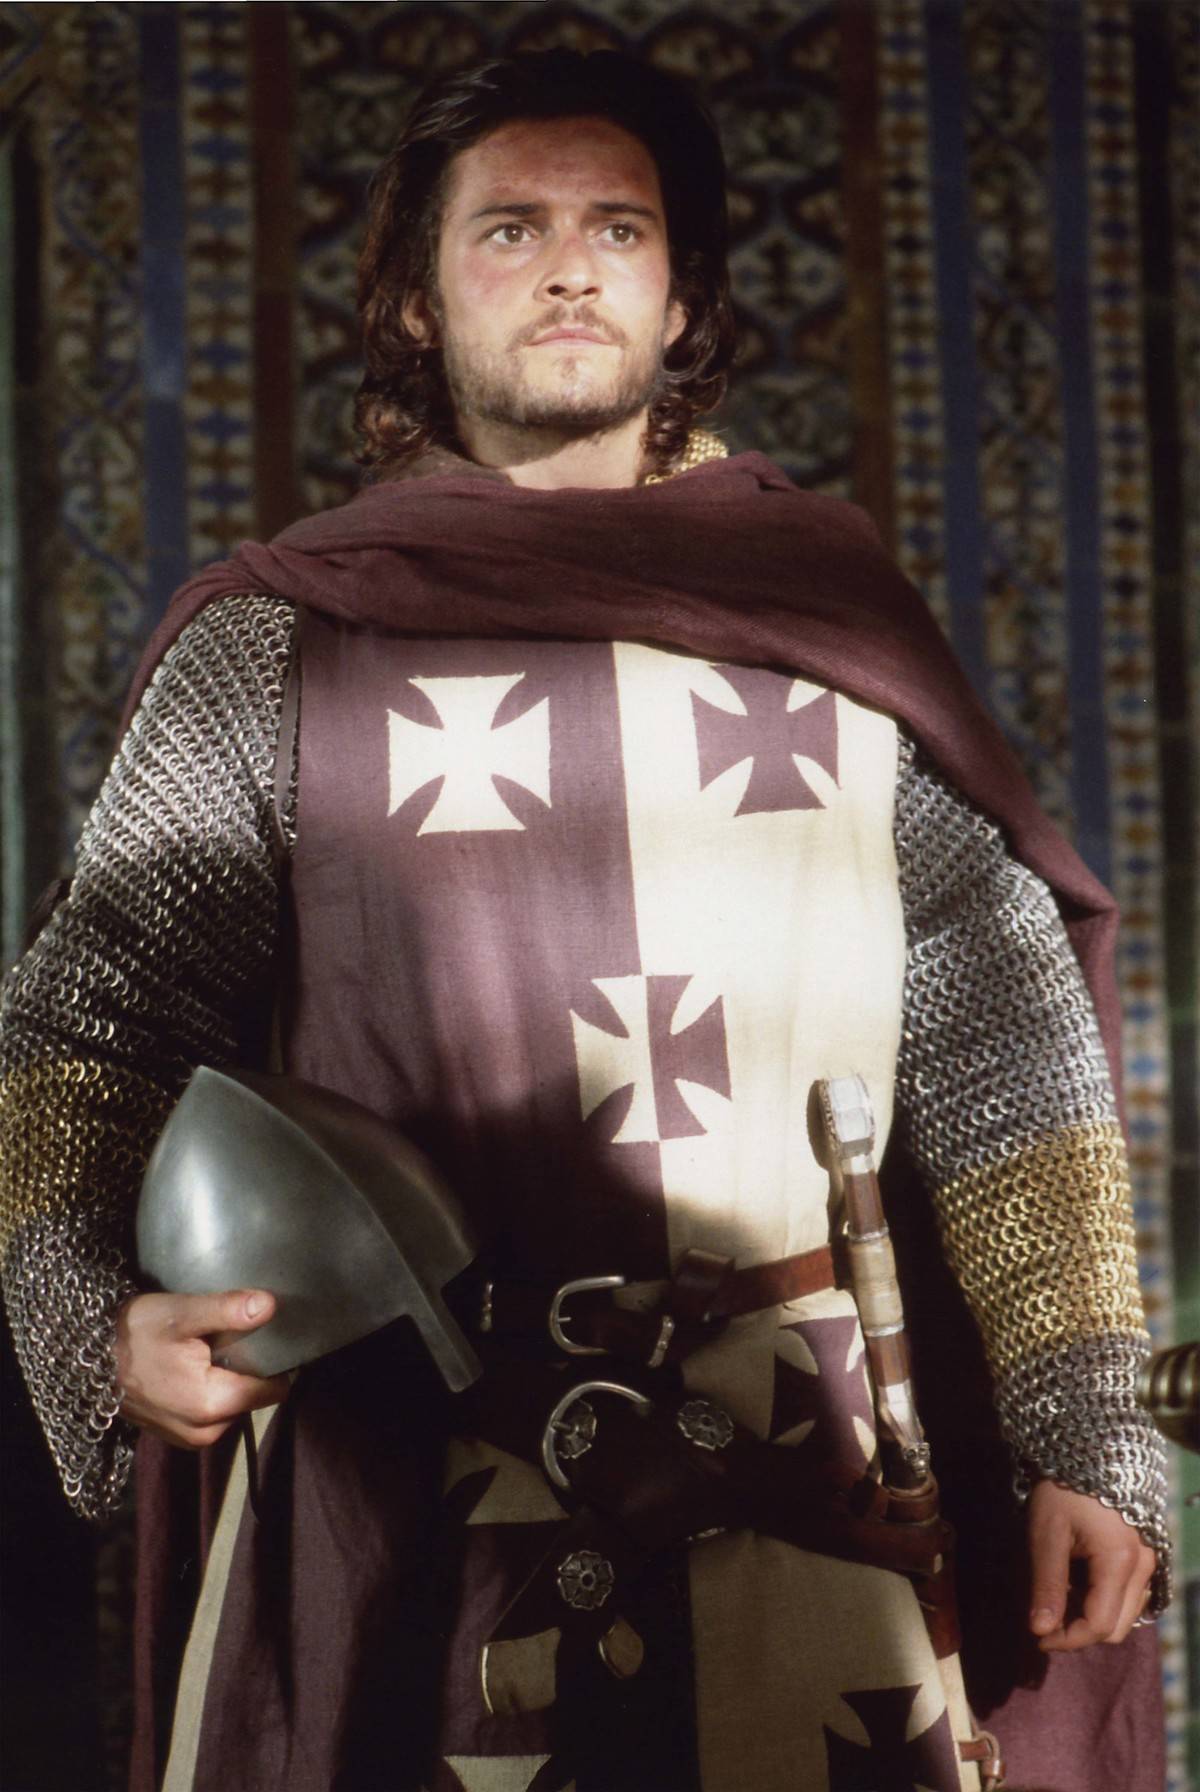 <p>Director Ridley Scott hit the bullseye if the medieval style of his <i>Kingdom of Heaven</i> movie was the intended target. The historical drama was set after the Second Crusade. </p> <p>Scott emphasized cinematography and set design in the production of the film. Combat scenes were painstakingly replicated to mirror 12th-century battles. </p>